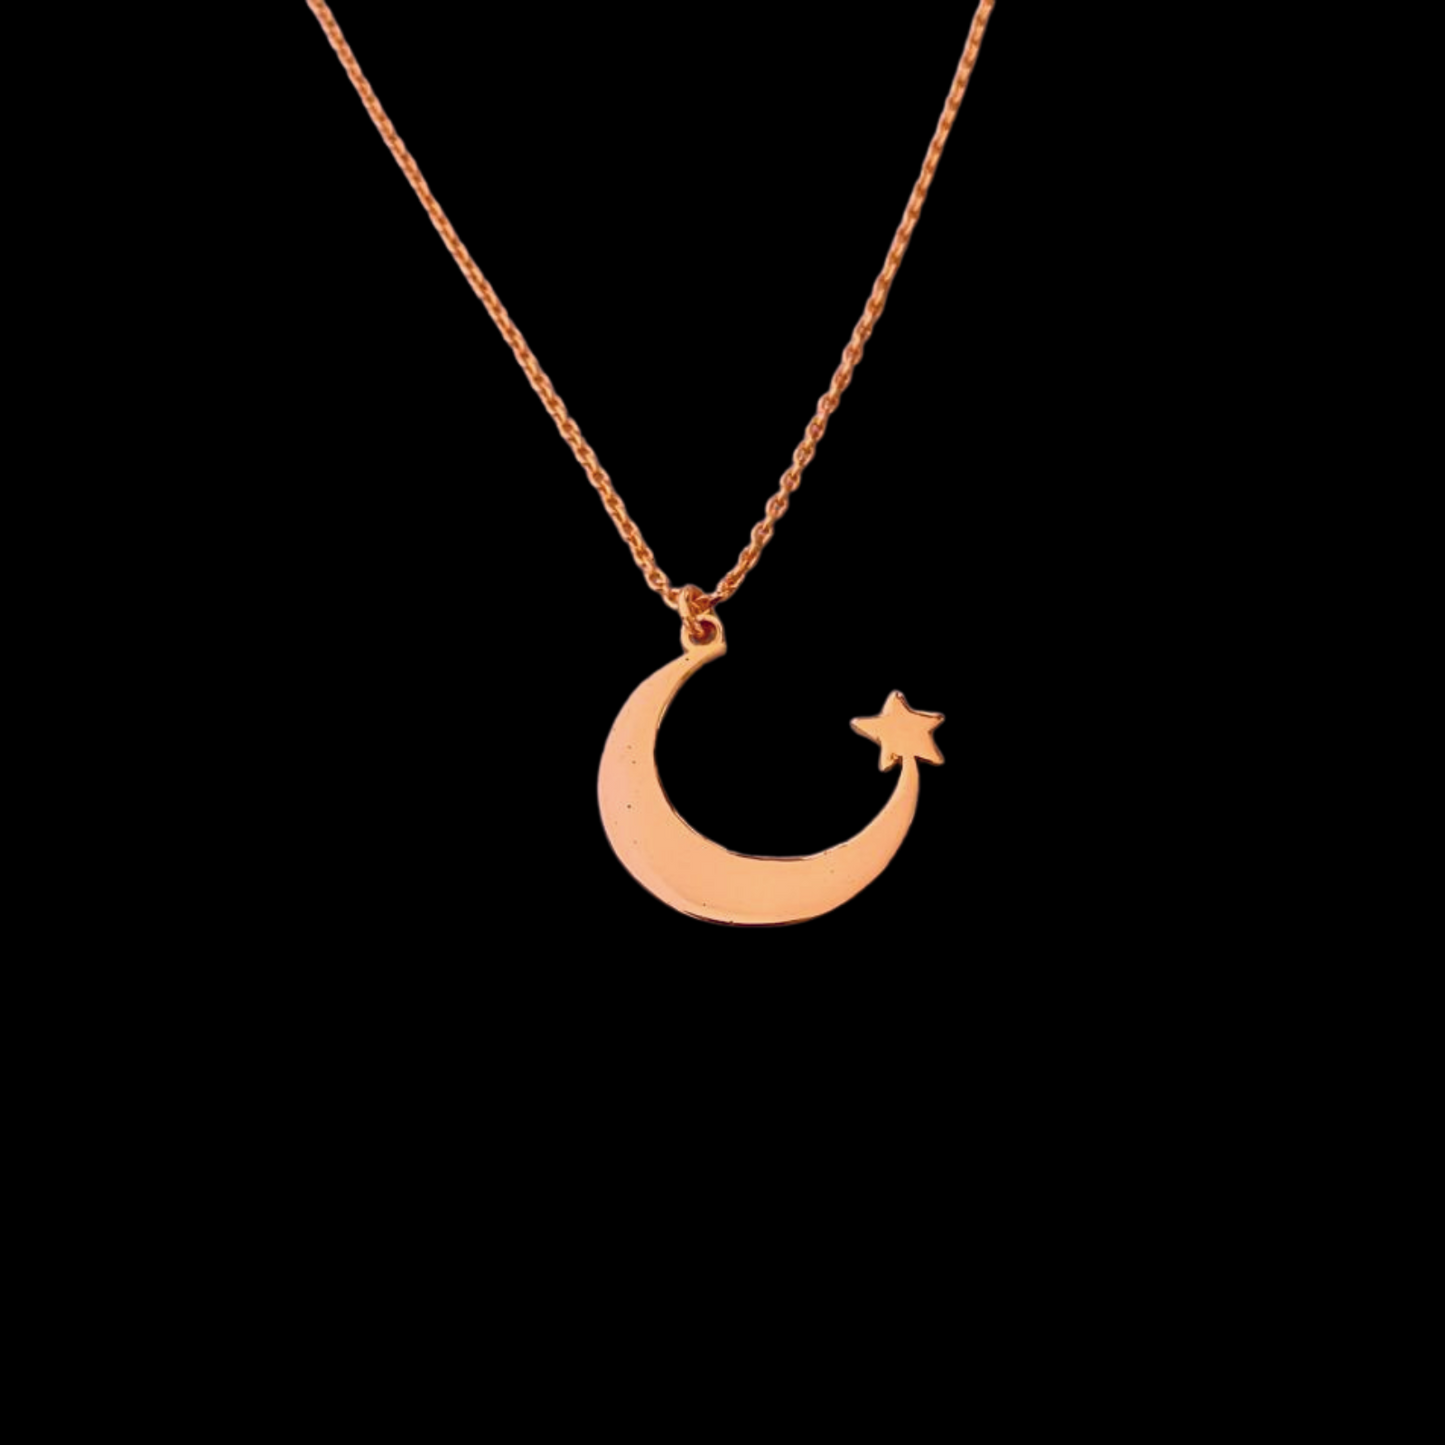 Moon and Star necklace in 92.5 Sterling Silver